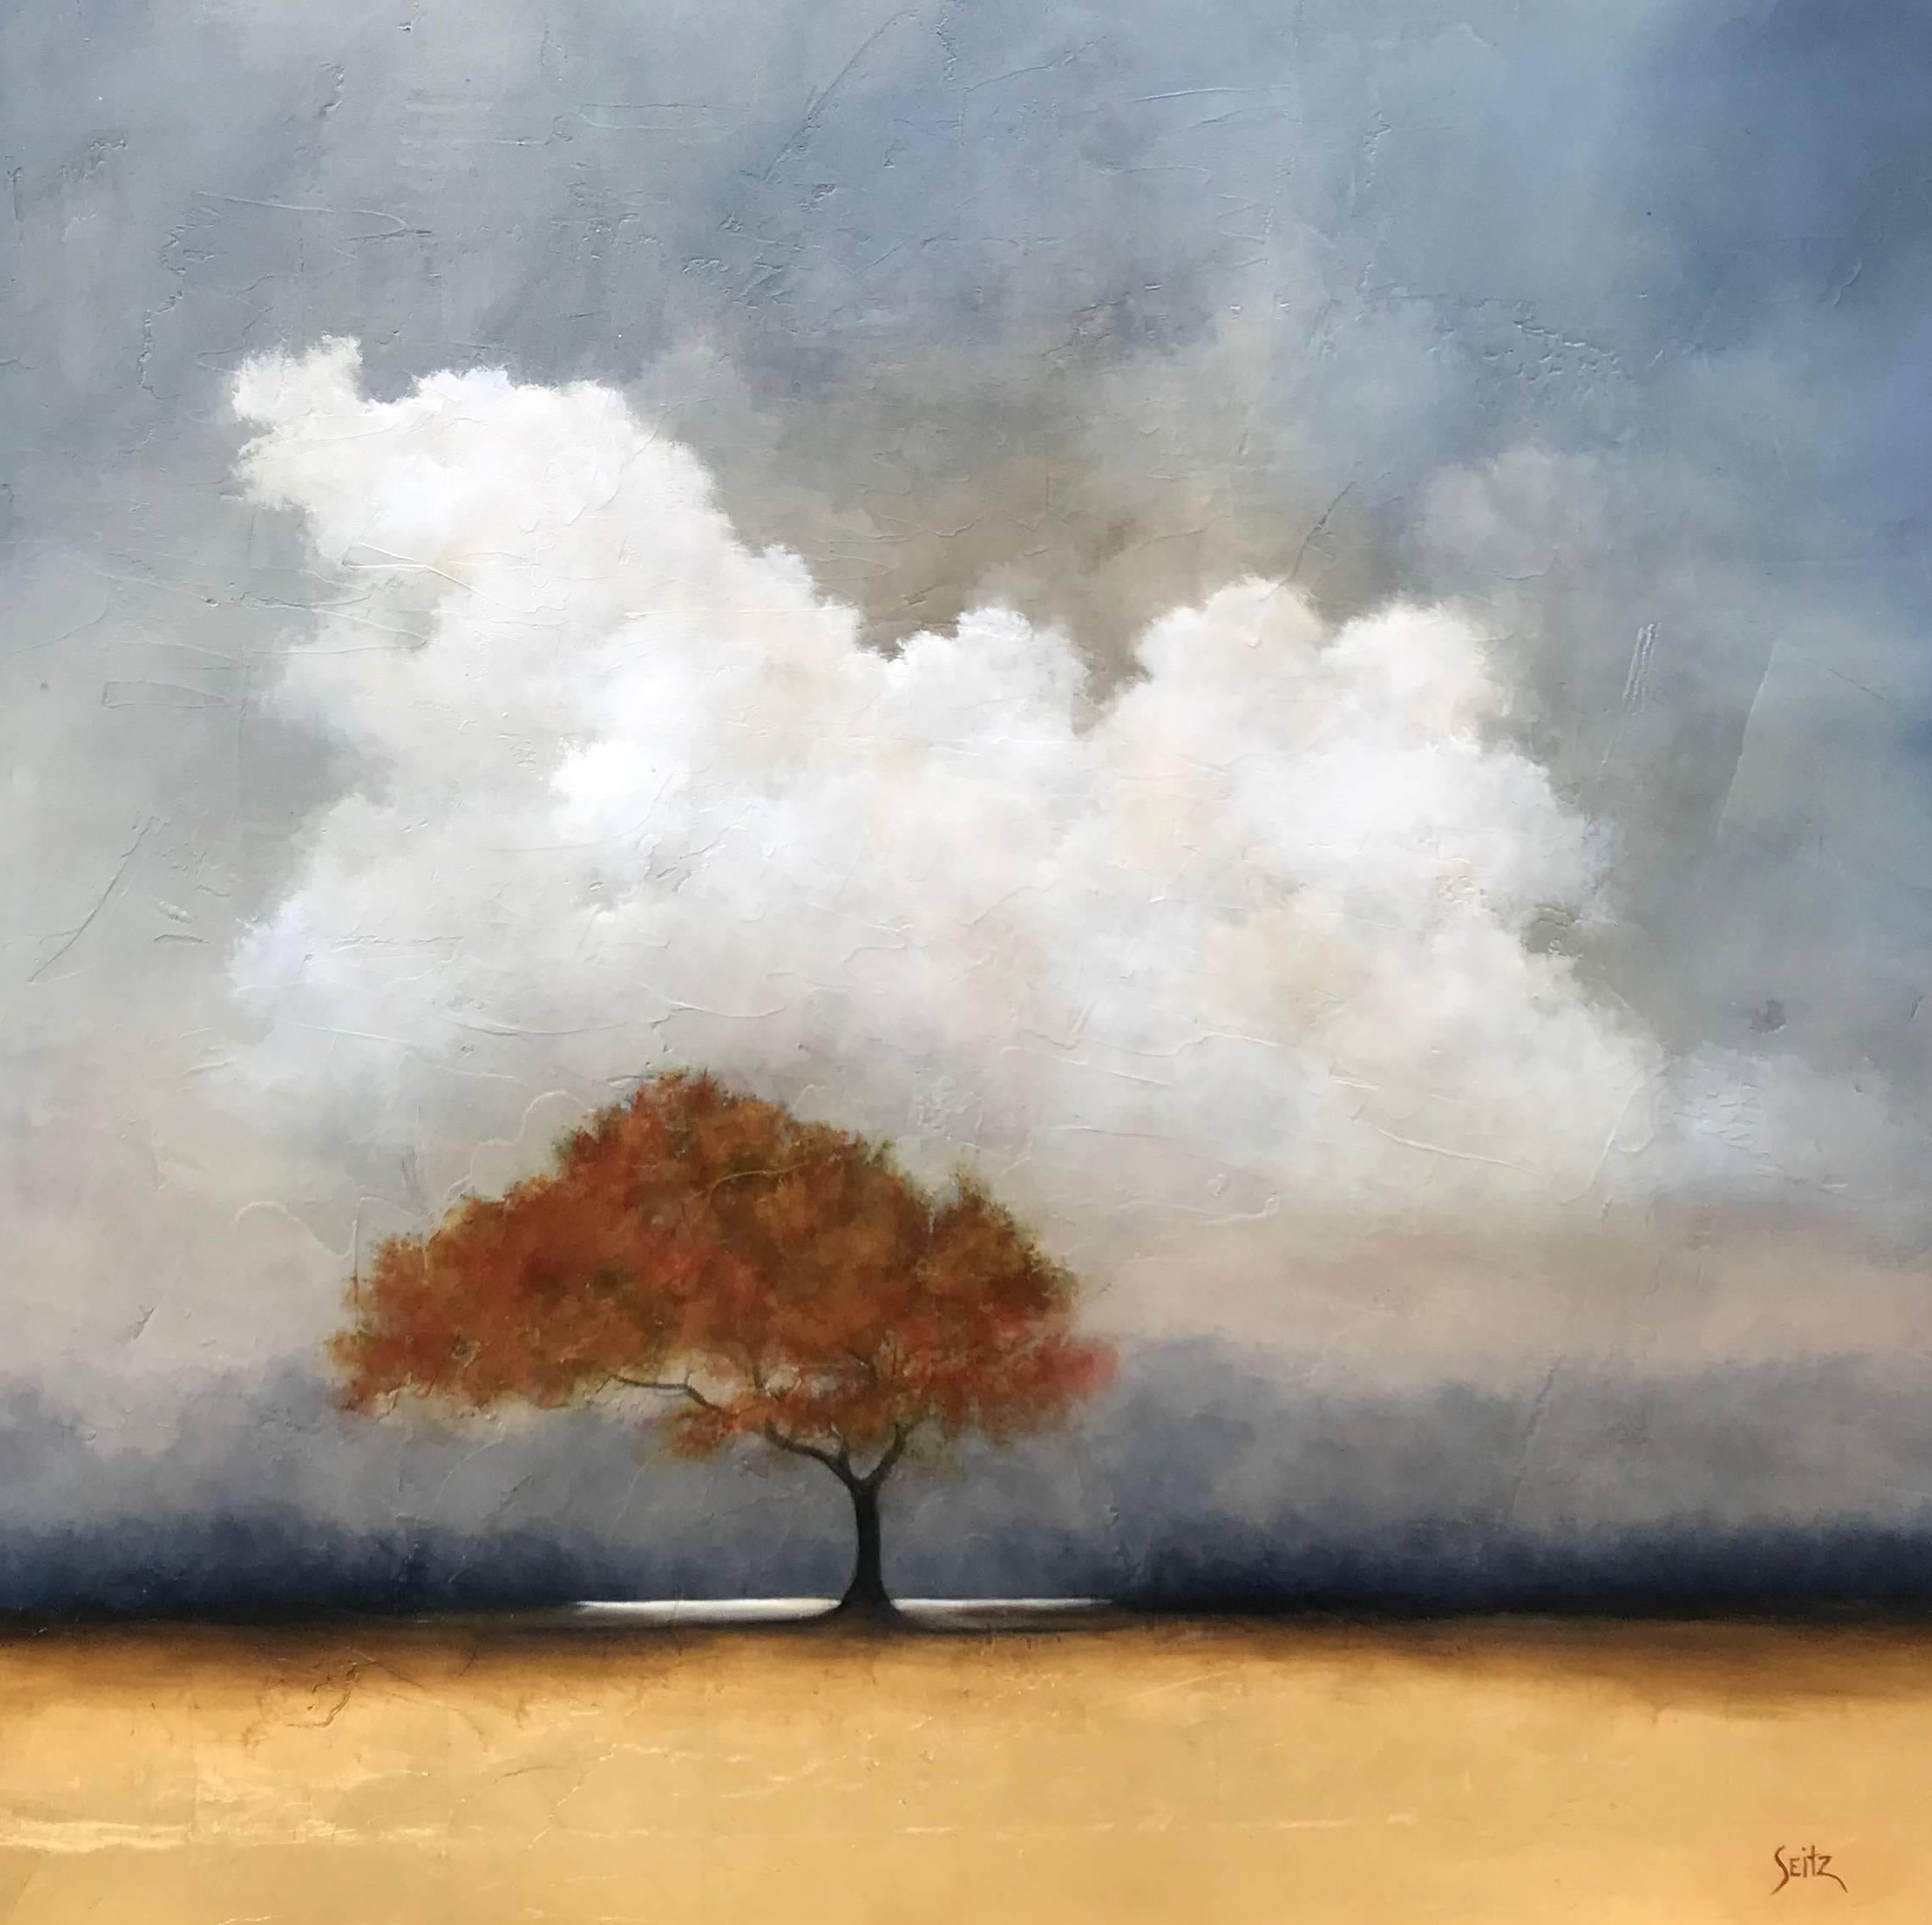 Jim Seitz Landscape Painting - "Whispering in the Wind" Large Square Contemporary Landscape